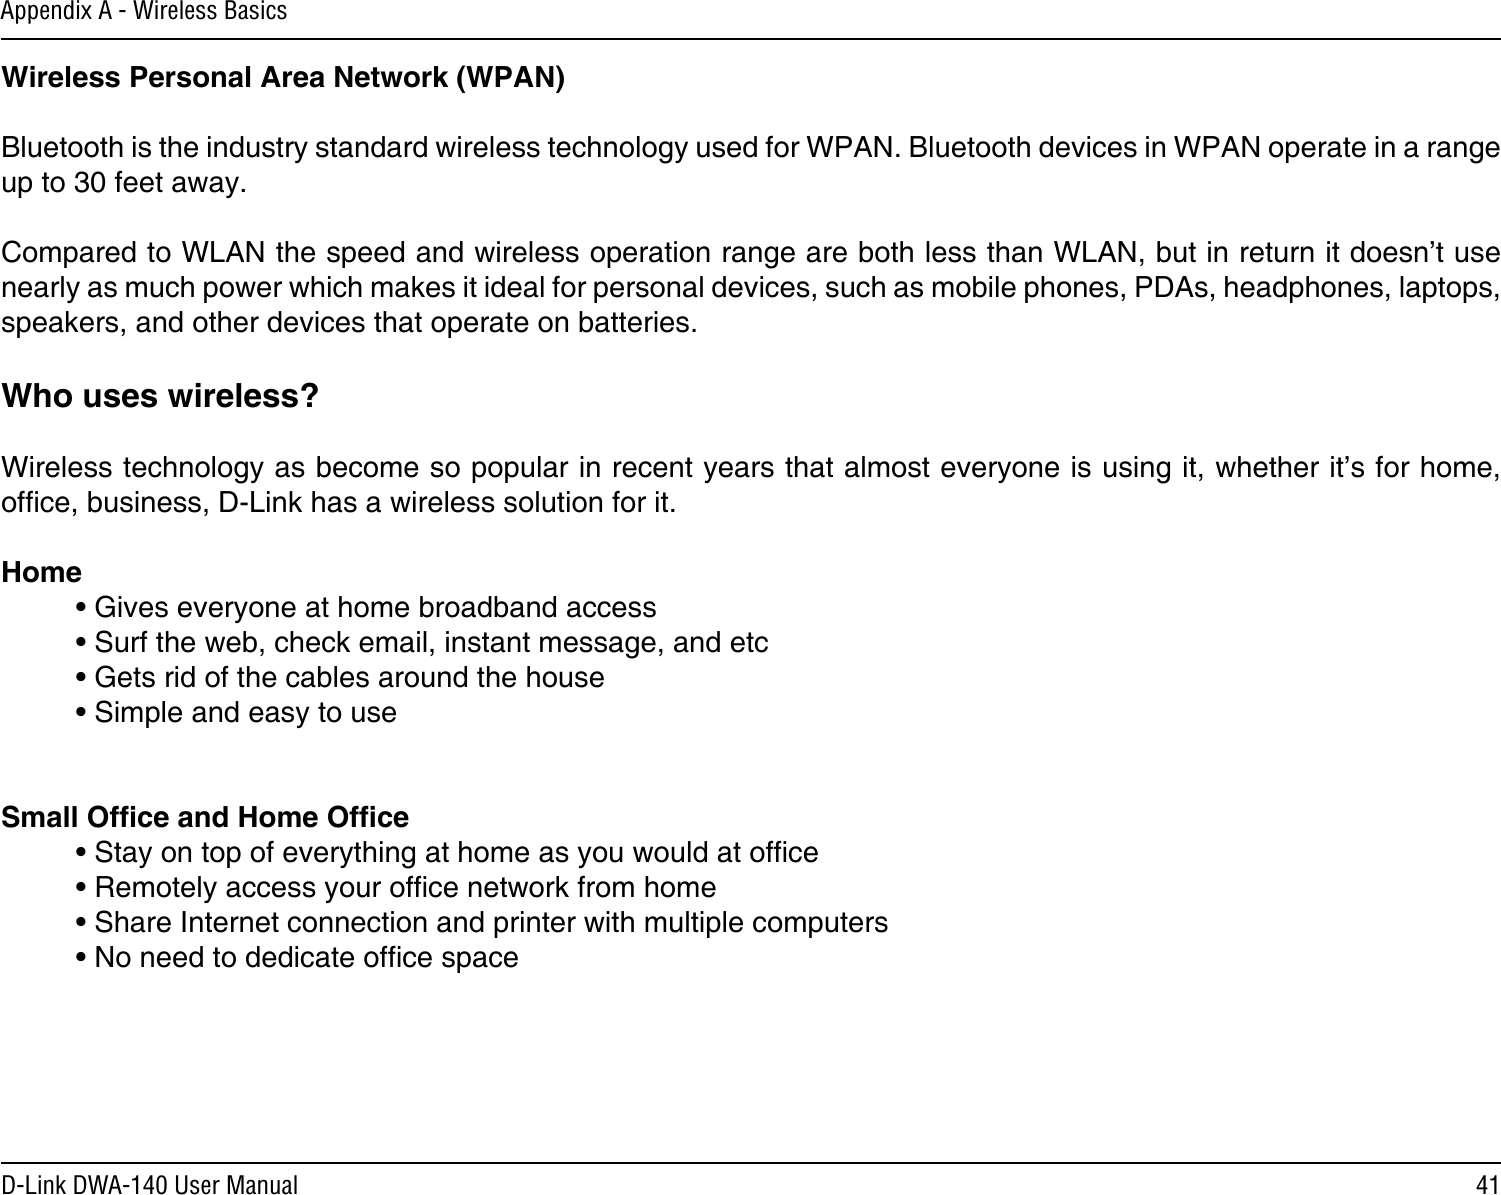 41D-Link DWA-140 User ManualAppendix A - Wireless BasicsWireless Personal Area Network (WPAN)Bluetooth is the industry standard wireless technology used for WPAN. Bluetooth devices in WPAN operate in a range up to 30 feet away.Compared to WLAN the speed and wireless operation range are both less than WLAN, but in return it doesn’t use nearly as much power which makes it ideal for personal devices, such as mobile phones, PDAs, headphones, laptops, speakers, and other devices that operate on batteries.Who uses wireless?   Wireless technology as become so popular in recent years that almost everyone is using it, whether it’s for home, ofce, business, D-Link has a wireless solution for it.Home  • Gives everyone at home broadband access  • Surf the web, check email, instant message, and etc  • Gets rid of the cables around the house  • Simple and easy to use Small Ofce and Home Ofce  • Stay on top of everything at home as you would at ofce  • Remotely access your ofce network from home  • Share Internet connection and printer with multiple computers  • No need to dedicate ofce space   